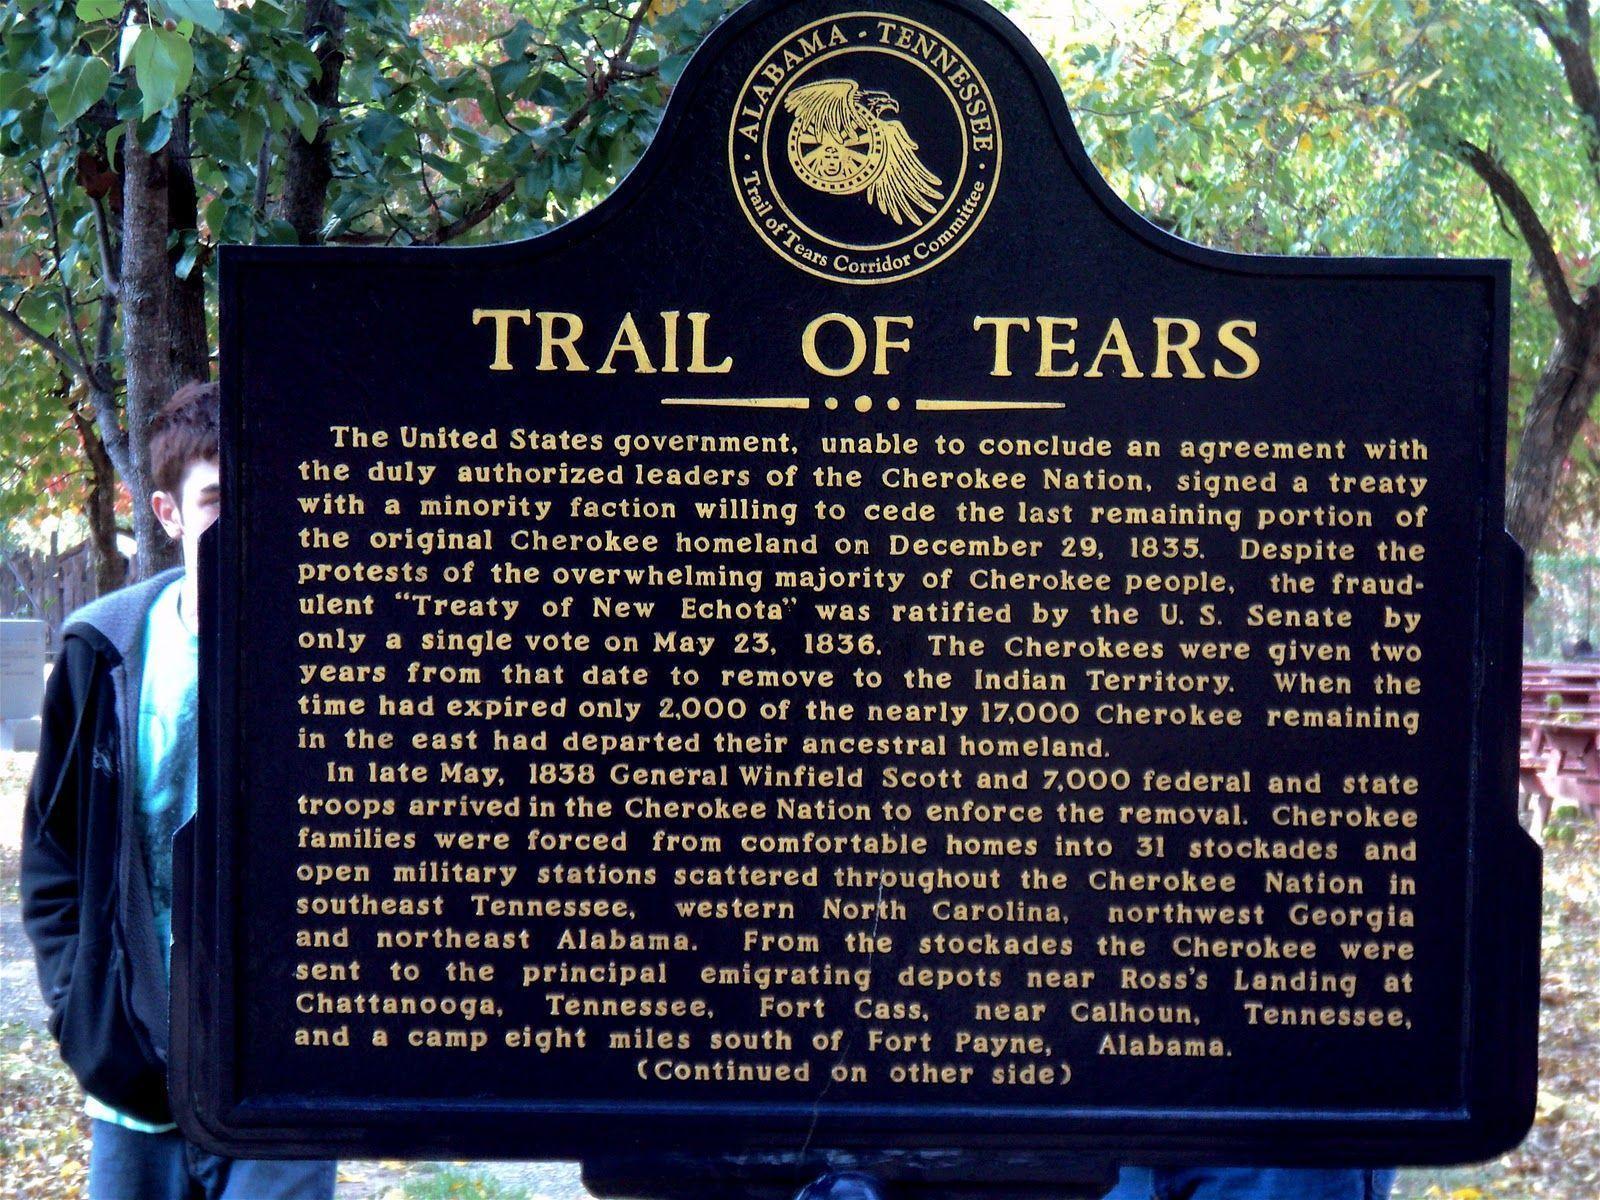 Journey to Excellence: Study America Saturday The Trail of Tears